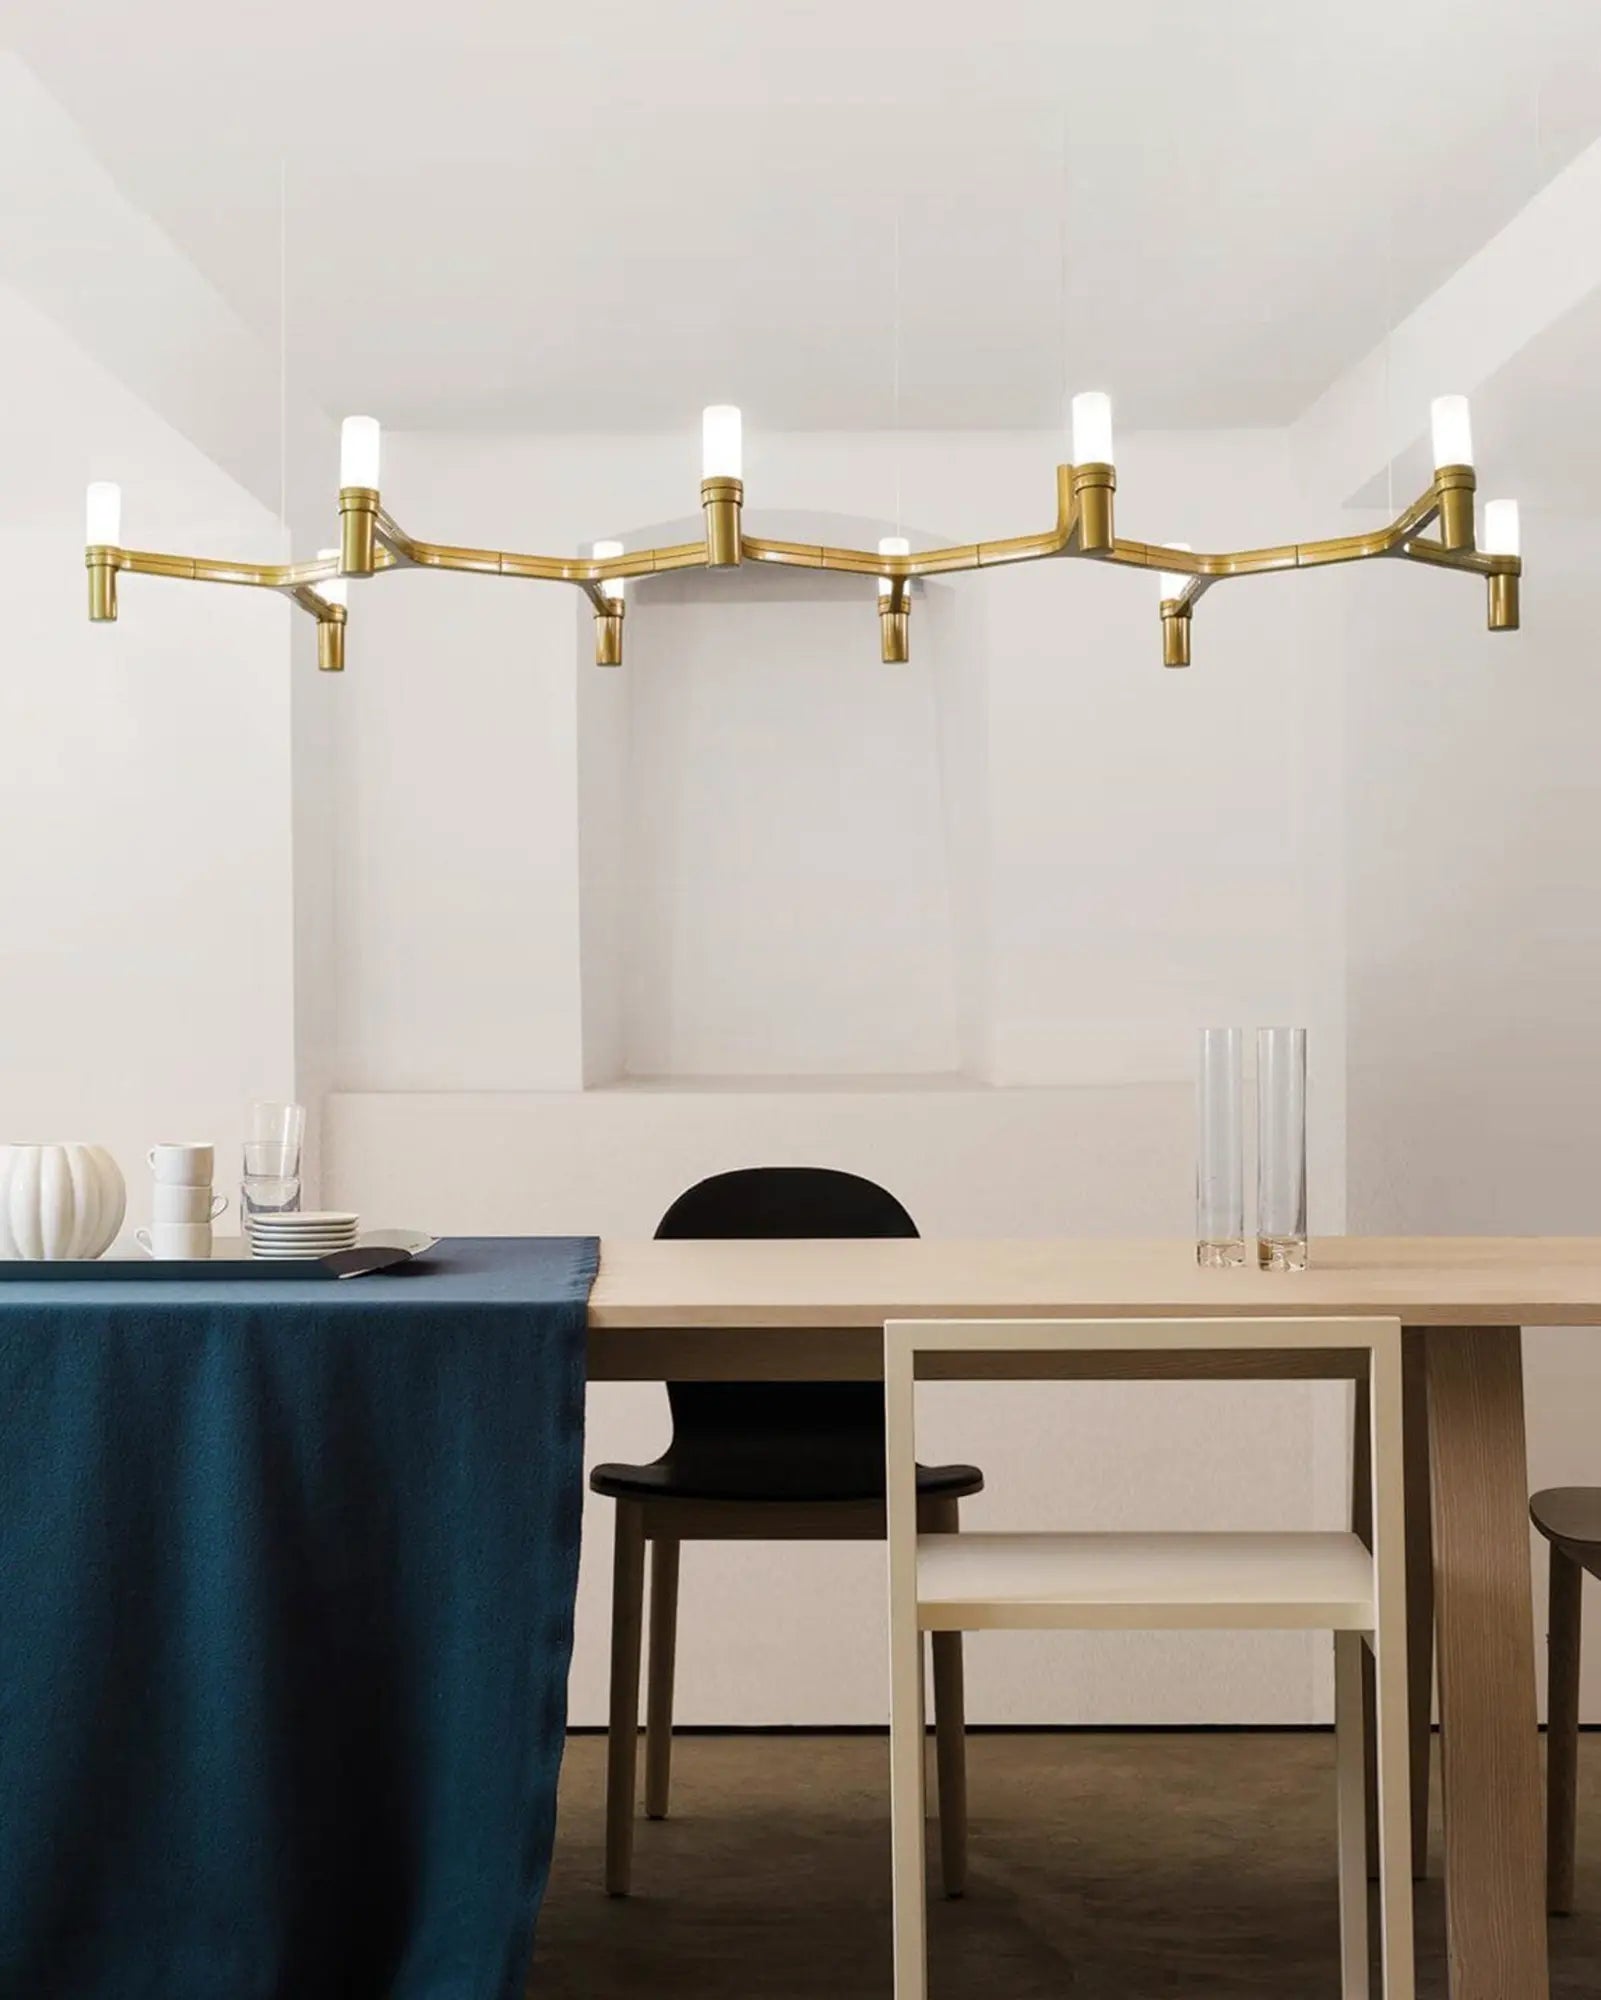 Crown plana long horizontal pendant light above a dining table